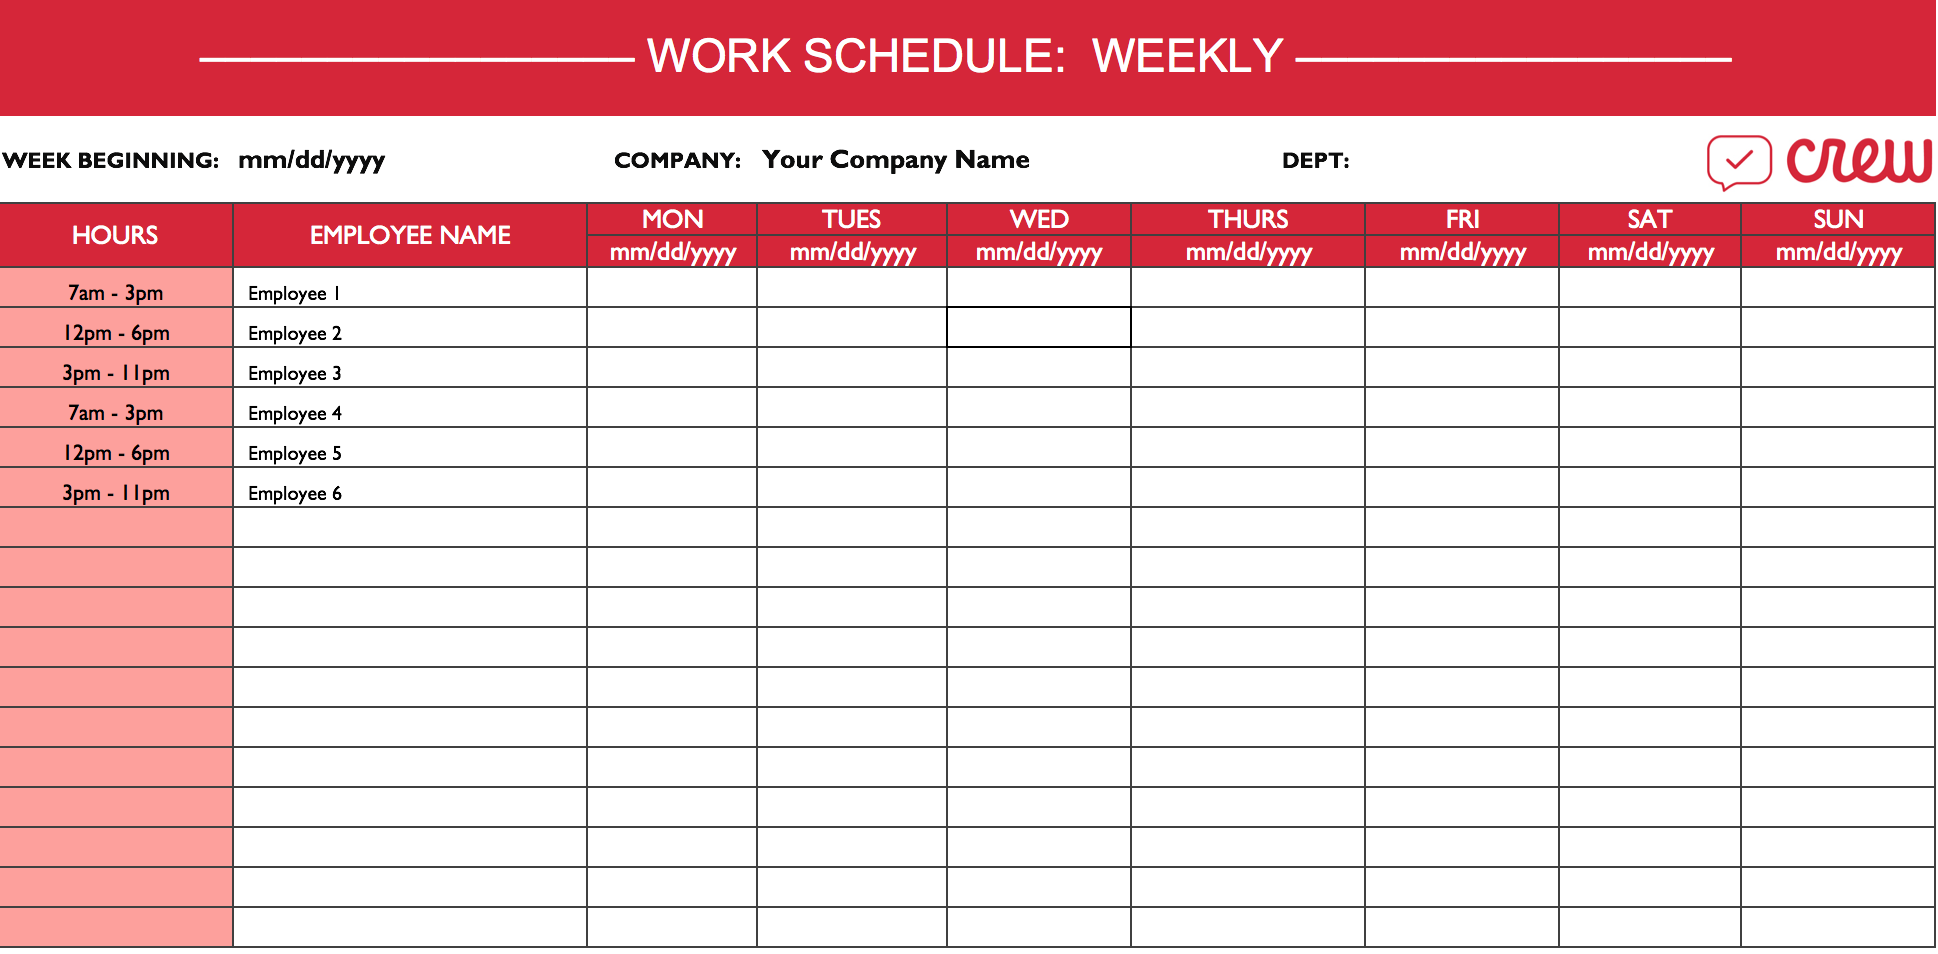 work plan calendar template free weekly schedule templates for 